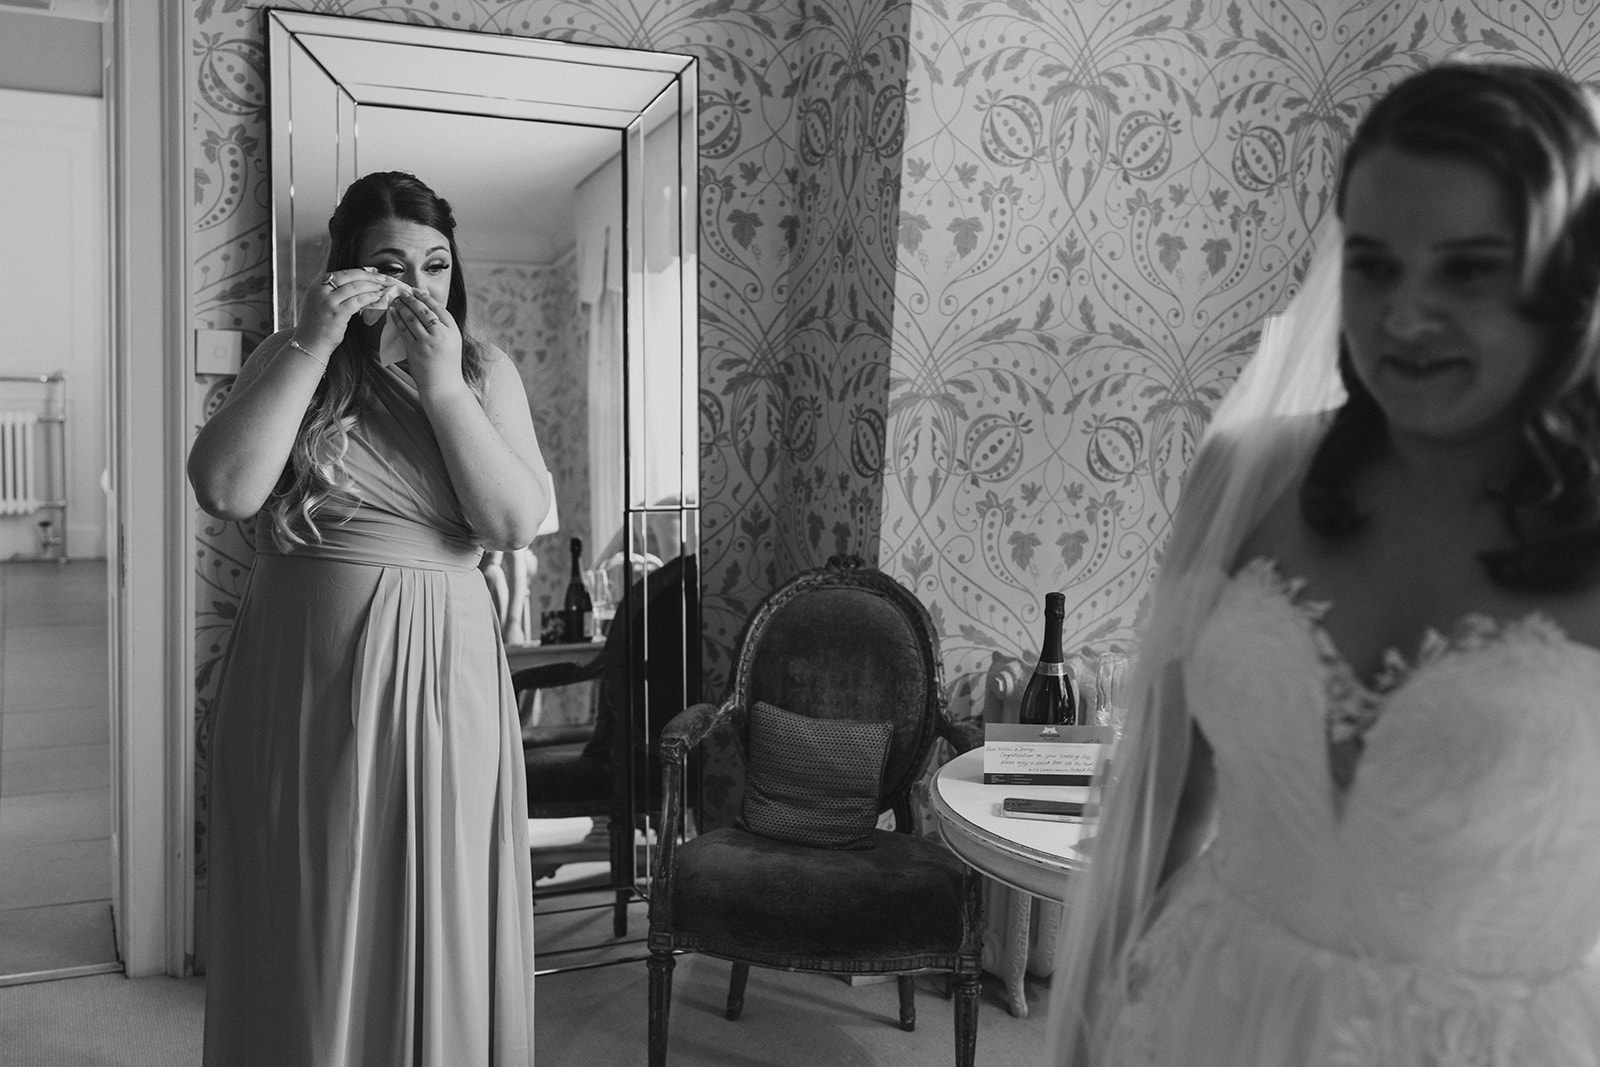 A bridesmaid getting emotional, seeing the bride in her wedding dress